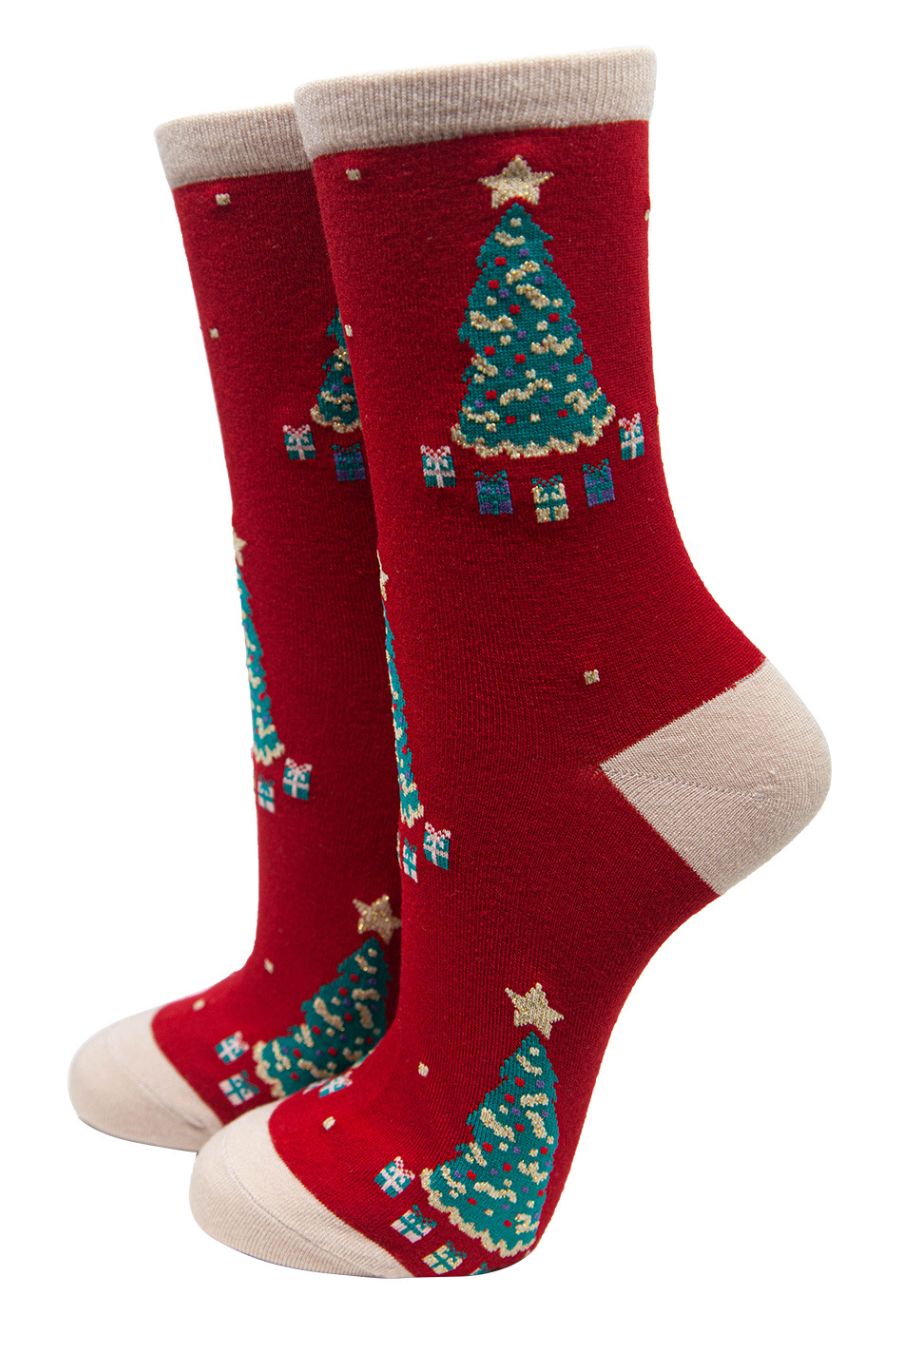 red ankle socks with green xmas trees and gifts